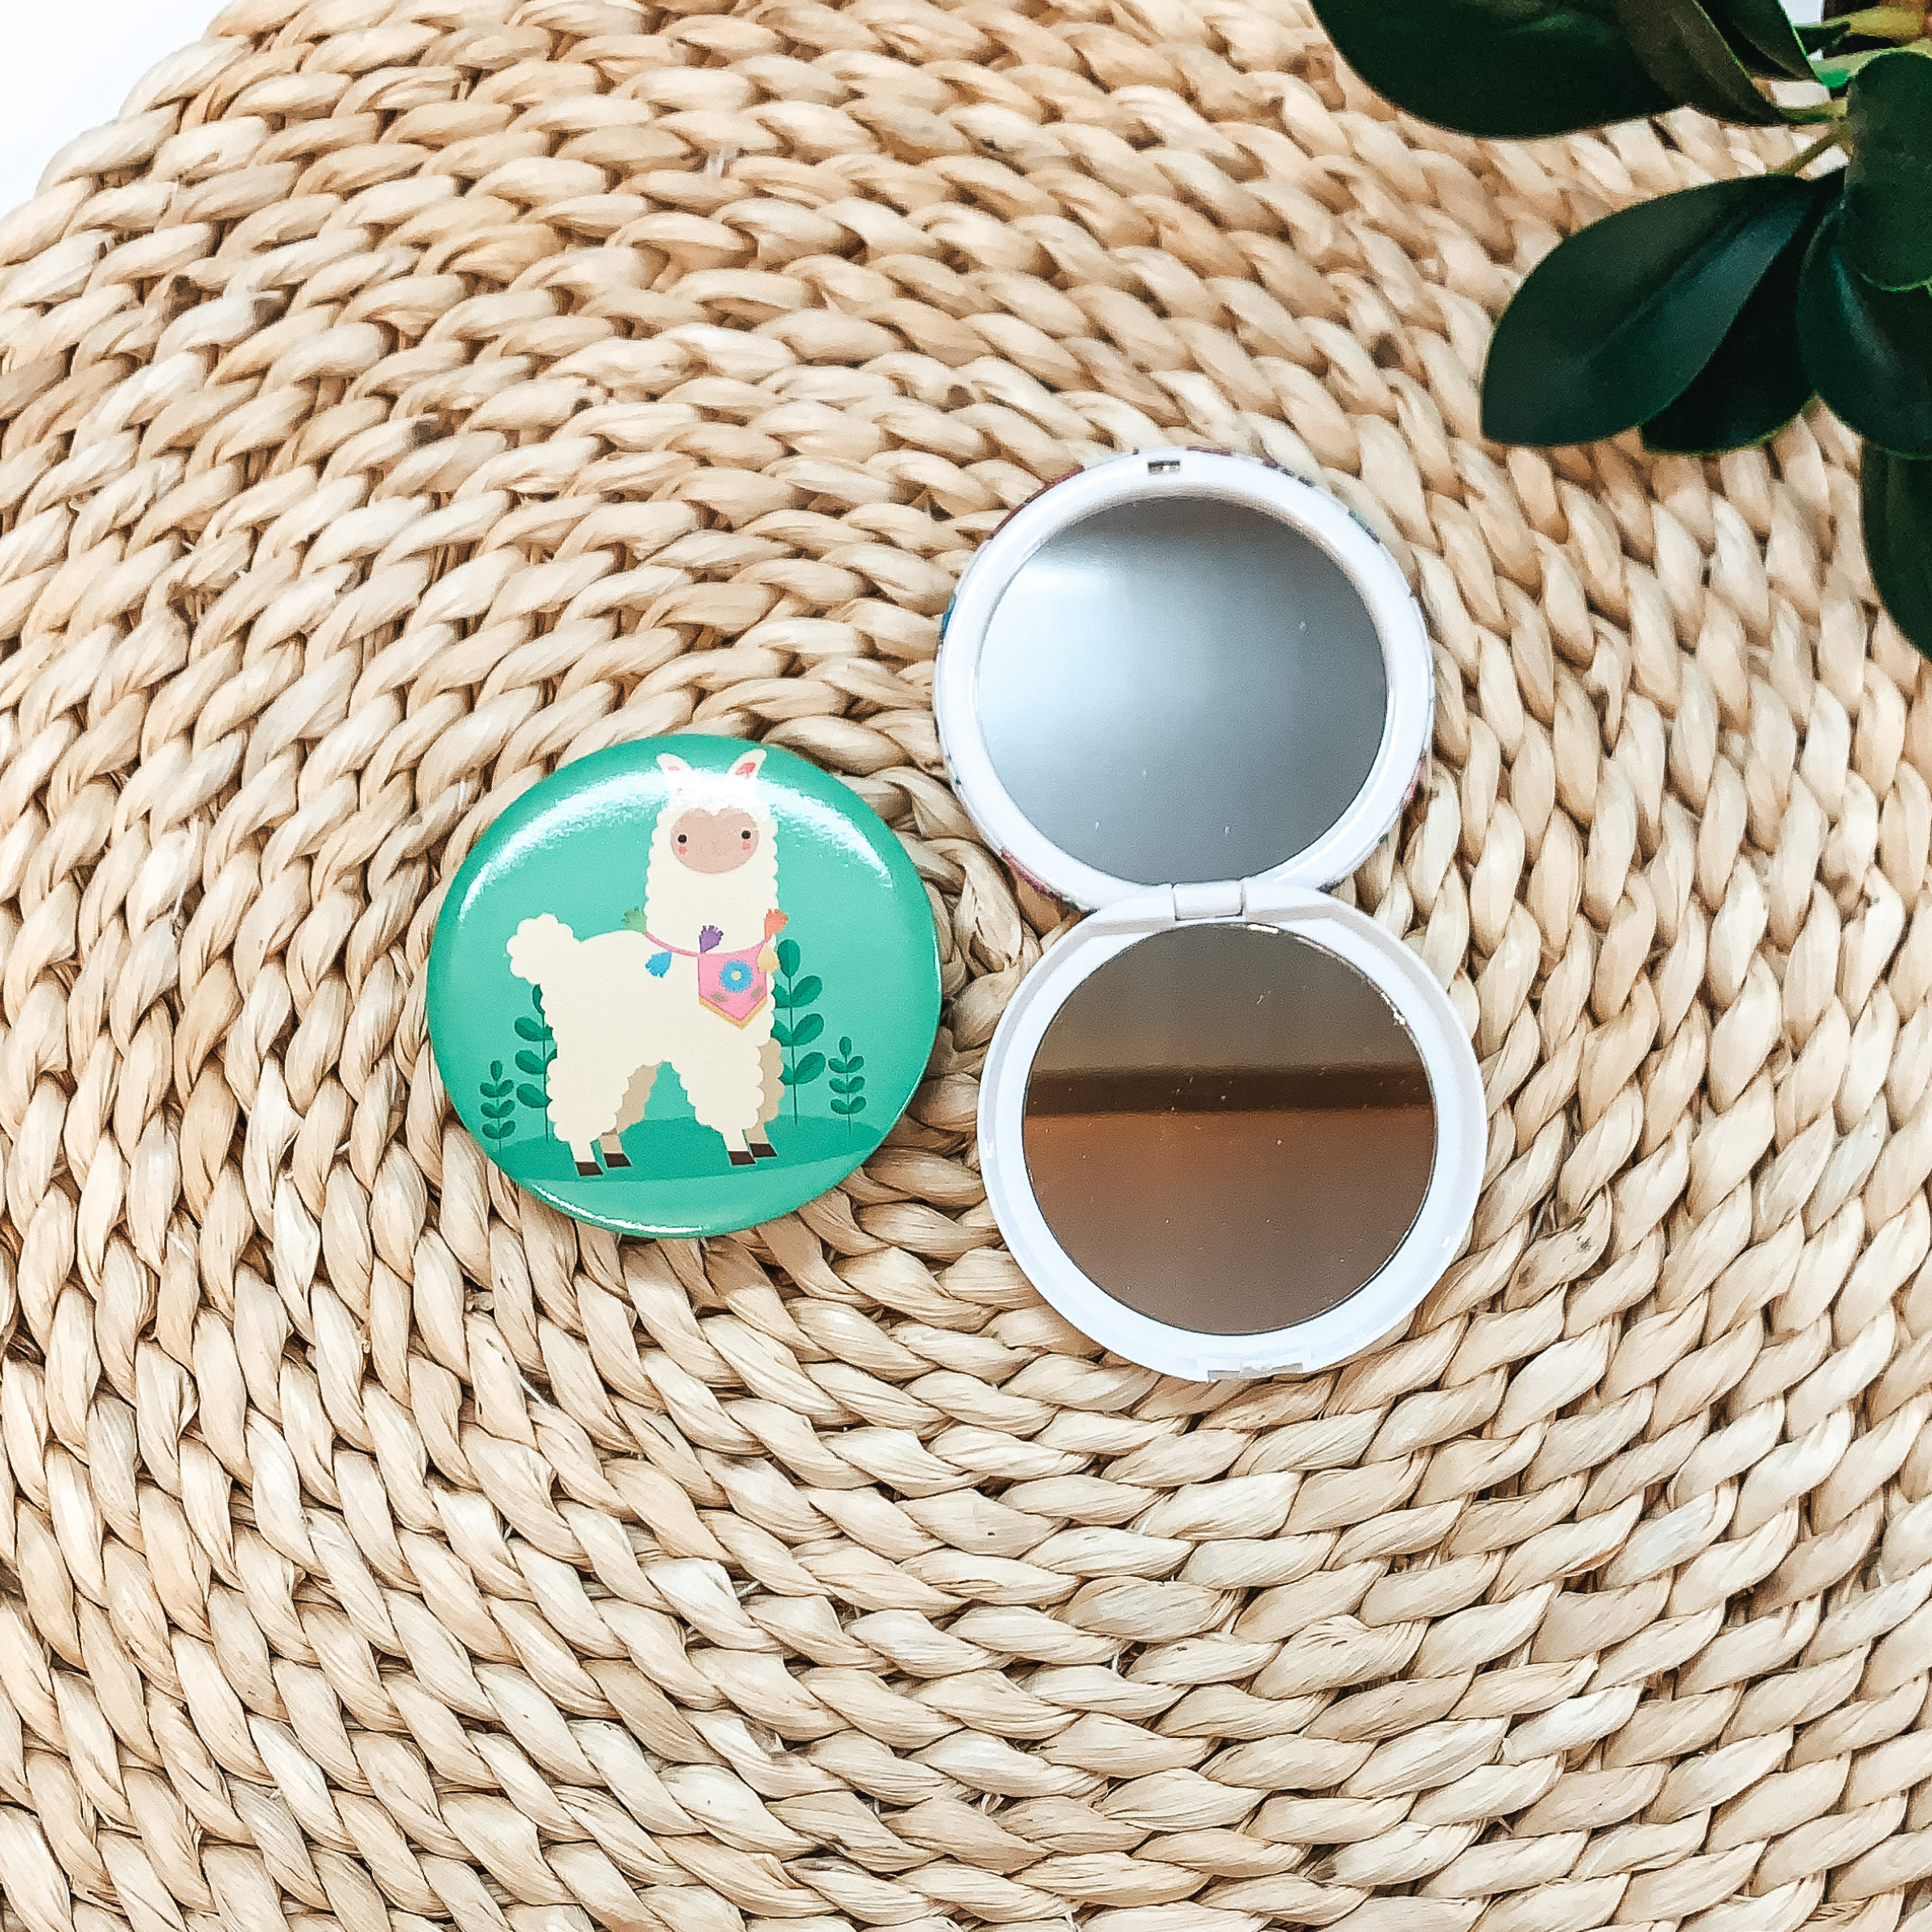 Buy 3 for $10 | Compact Mirrors in Assorted Llama Prints - Giddy Up Glamour Boutique